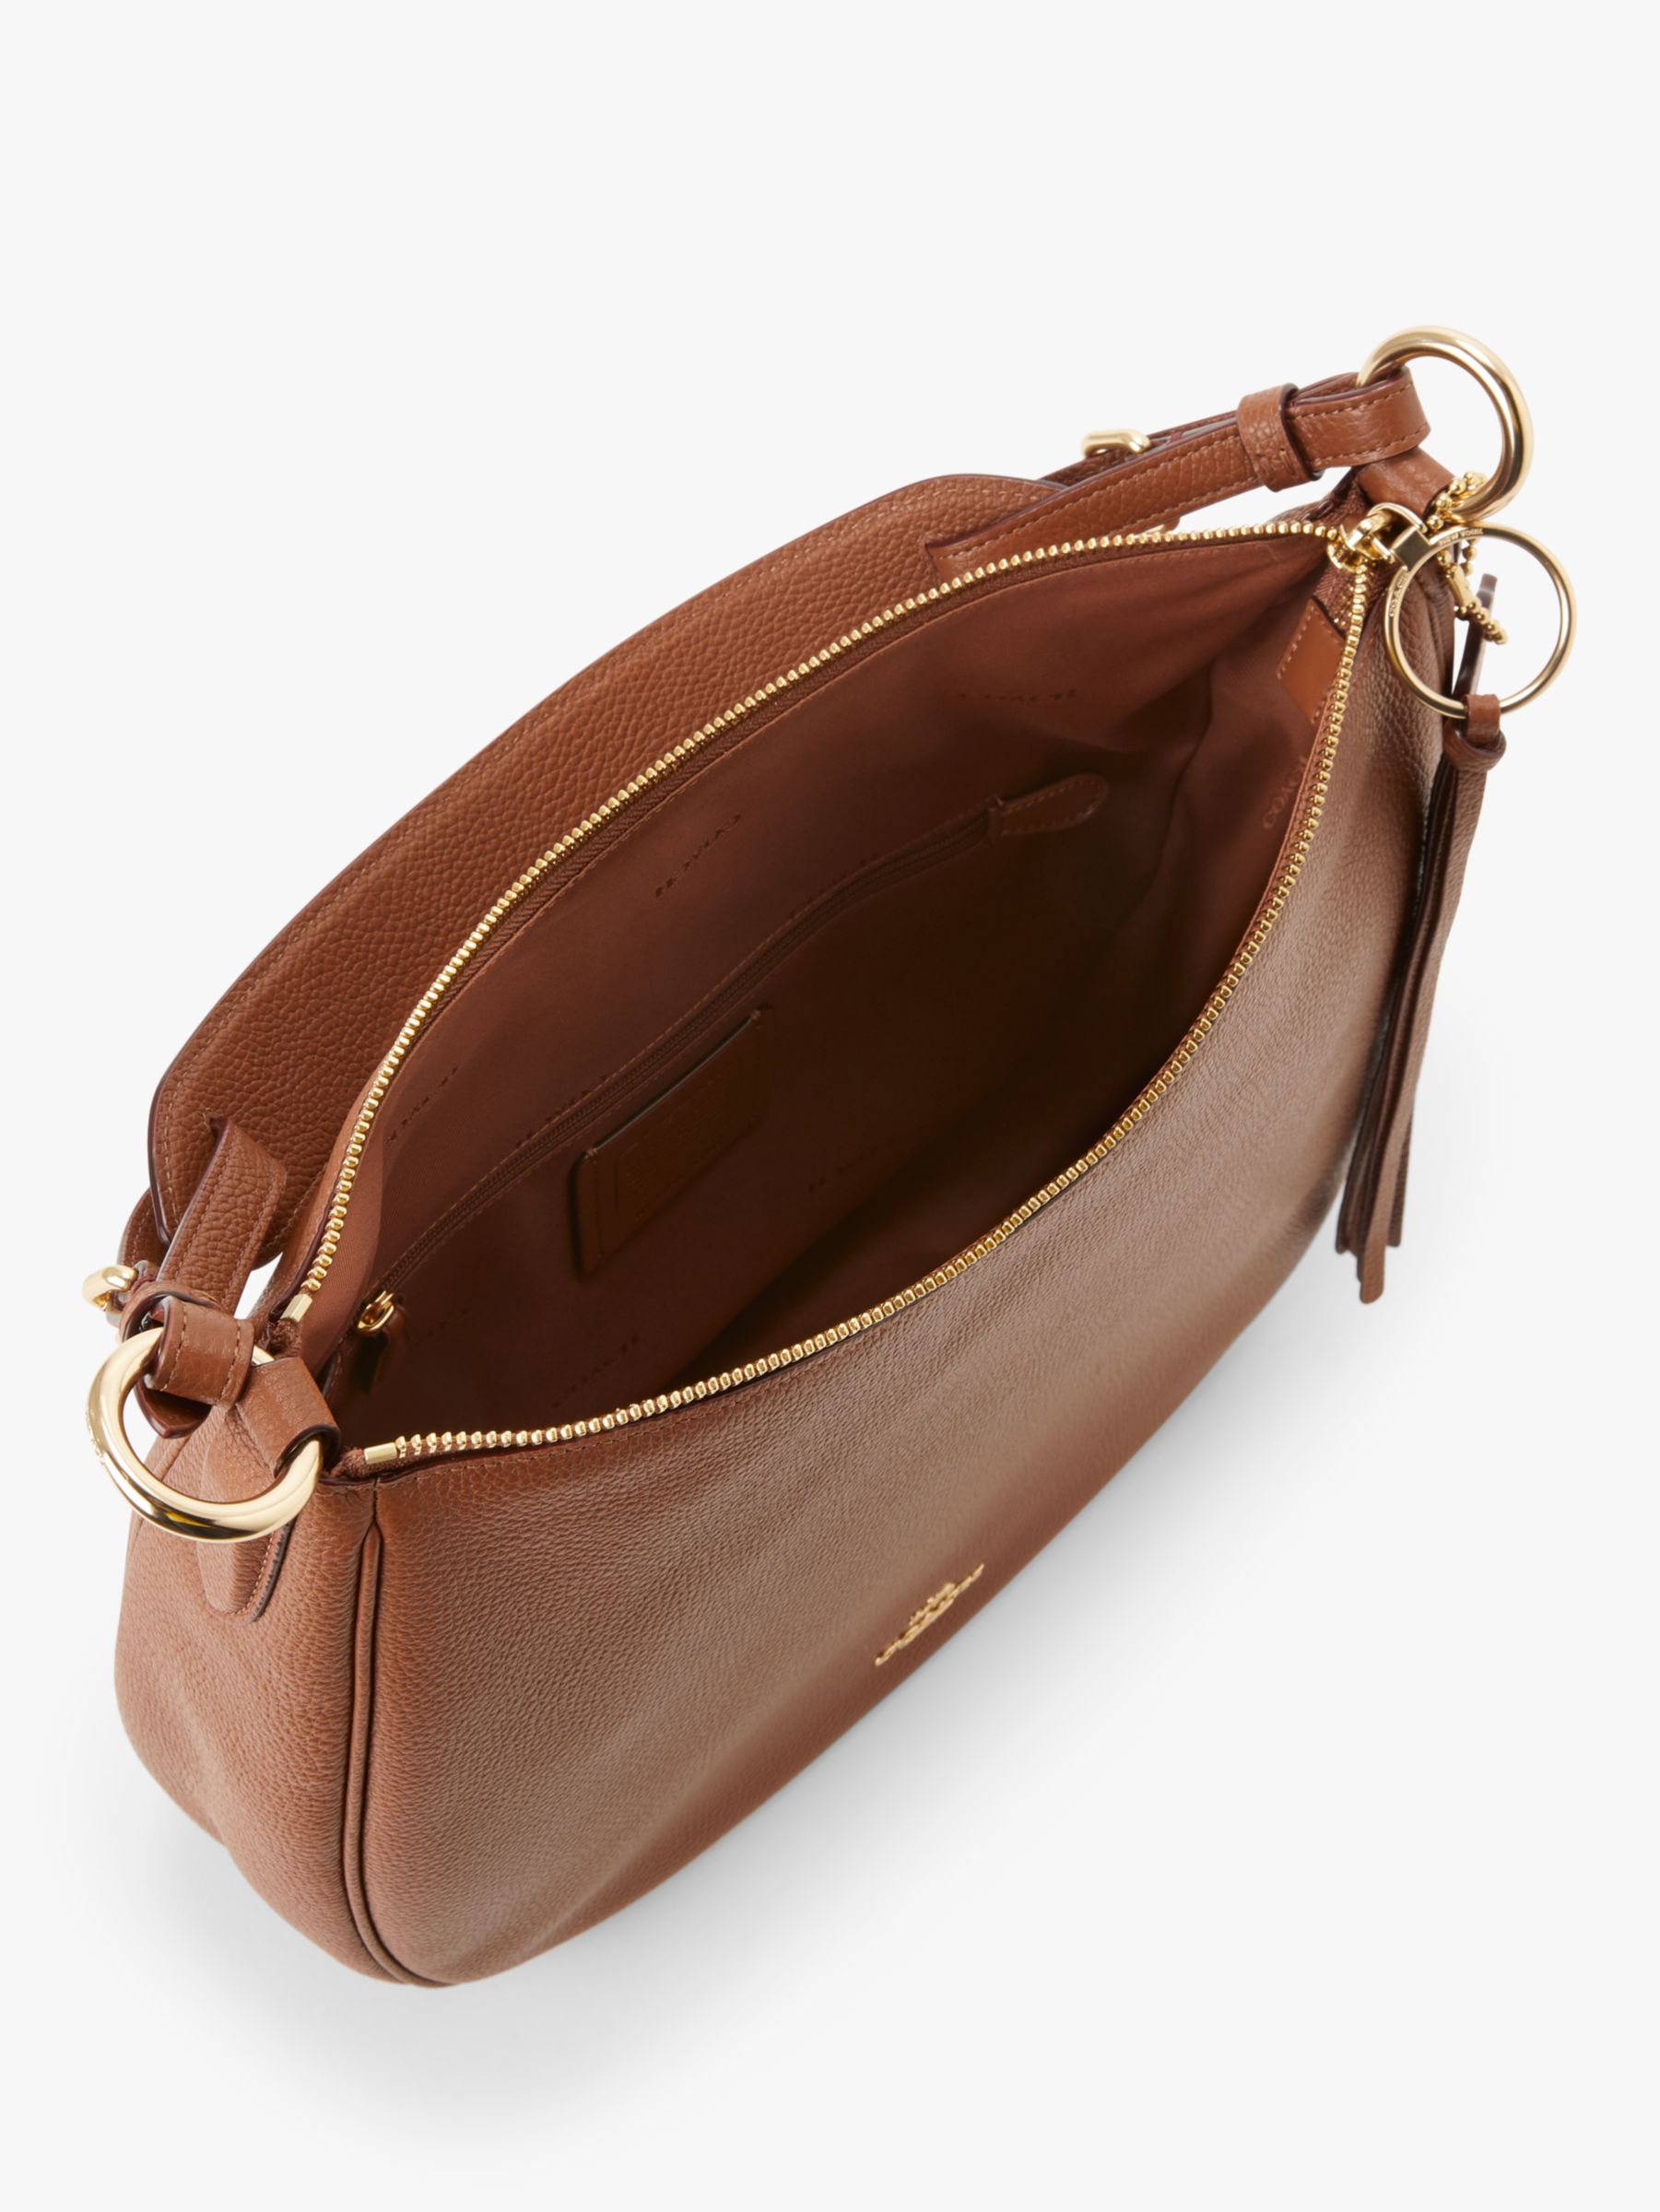 Coach Sutton Pebbled Leather Hobo Bag, Tan at John Lewis & Partners